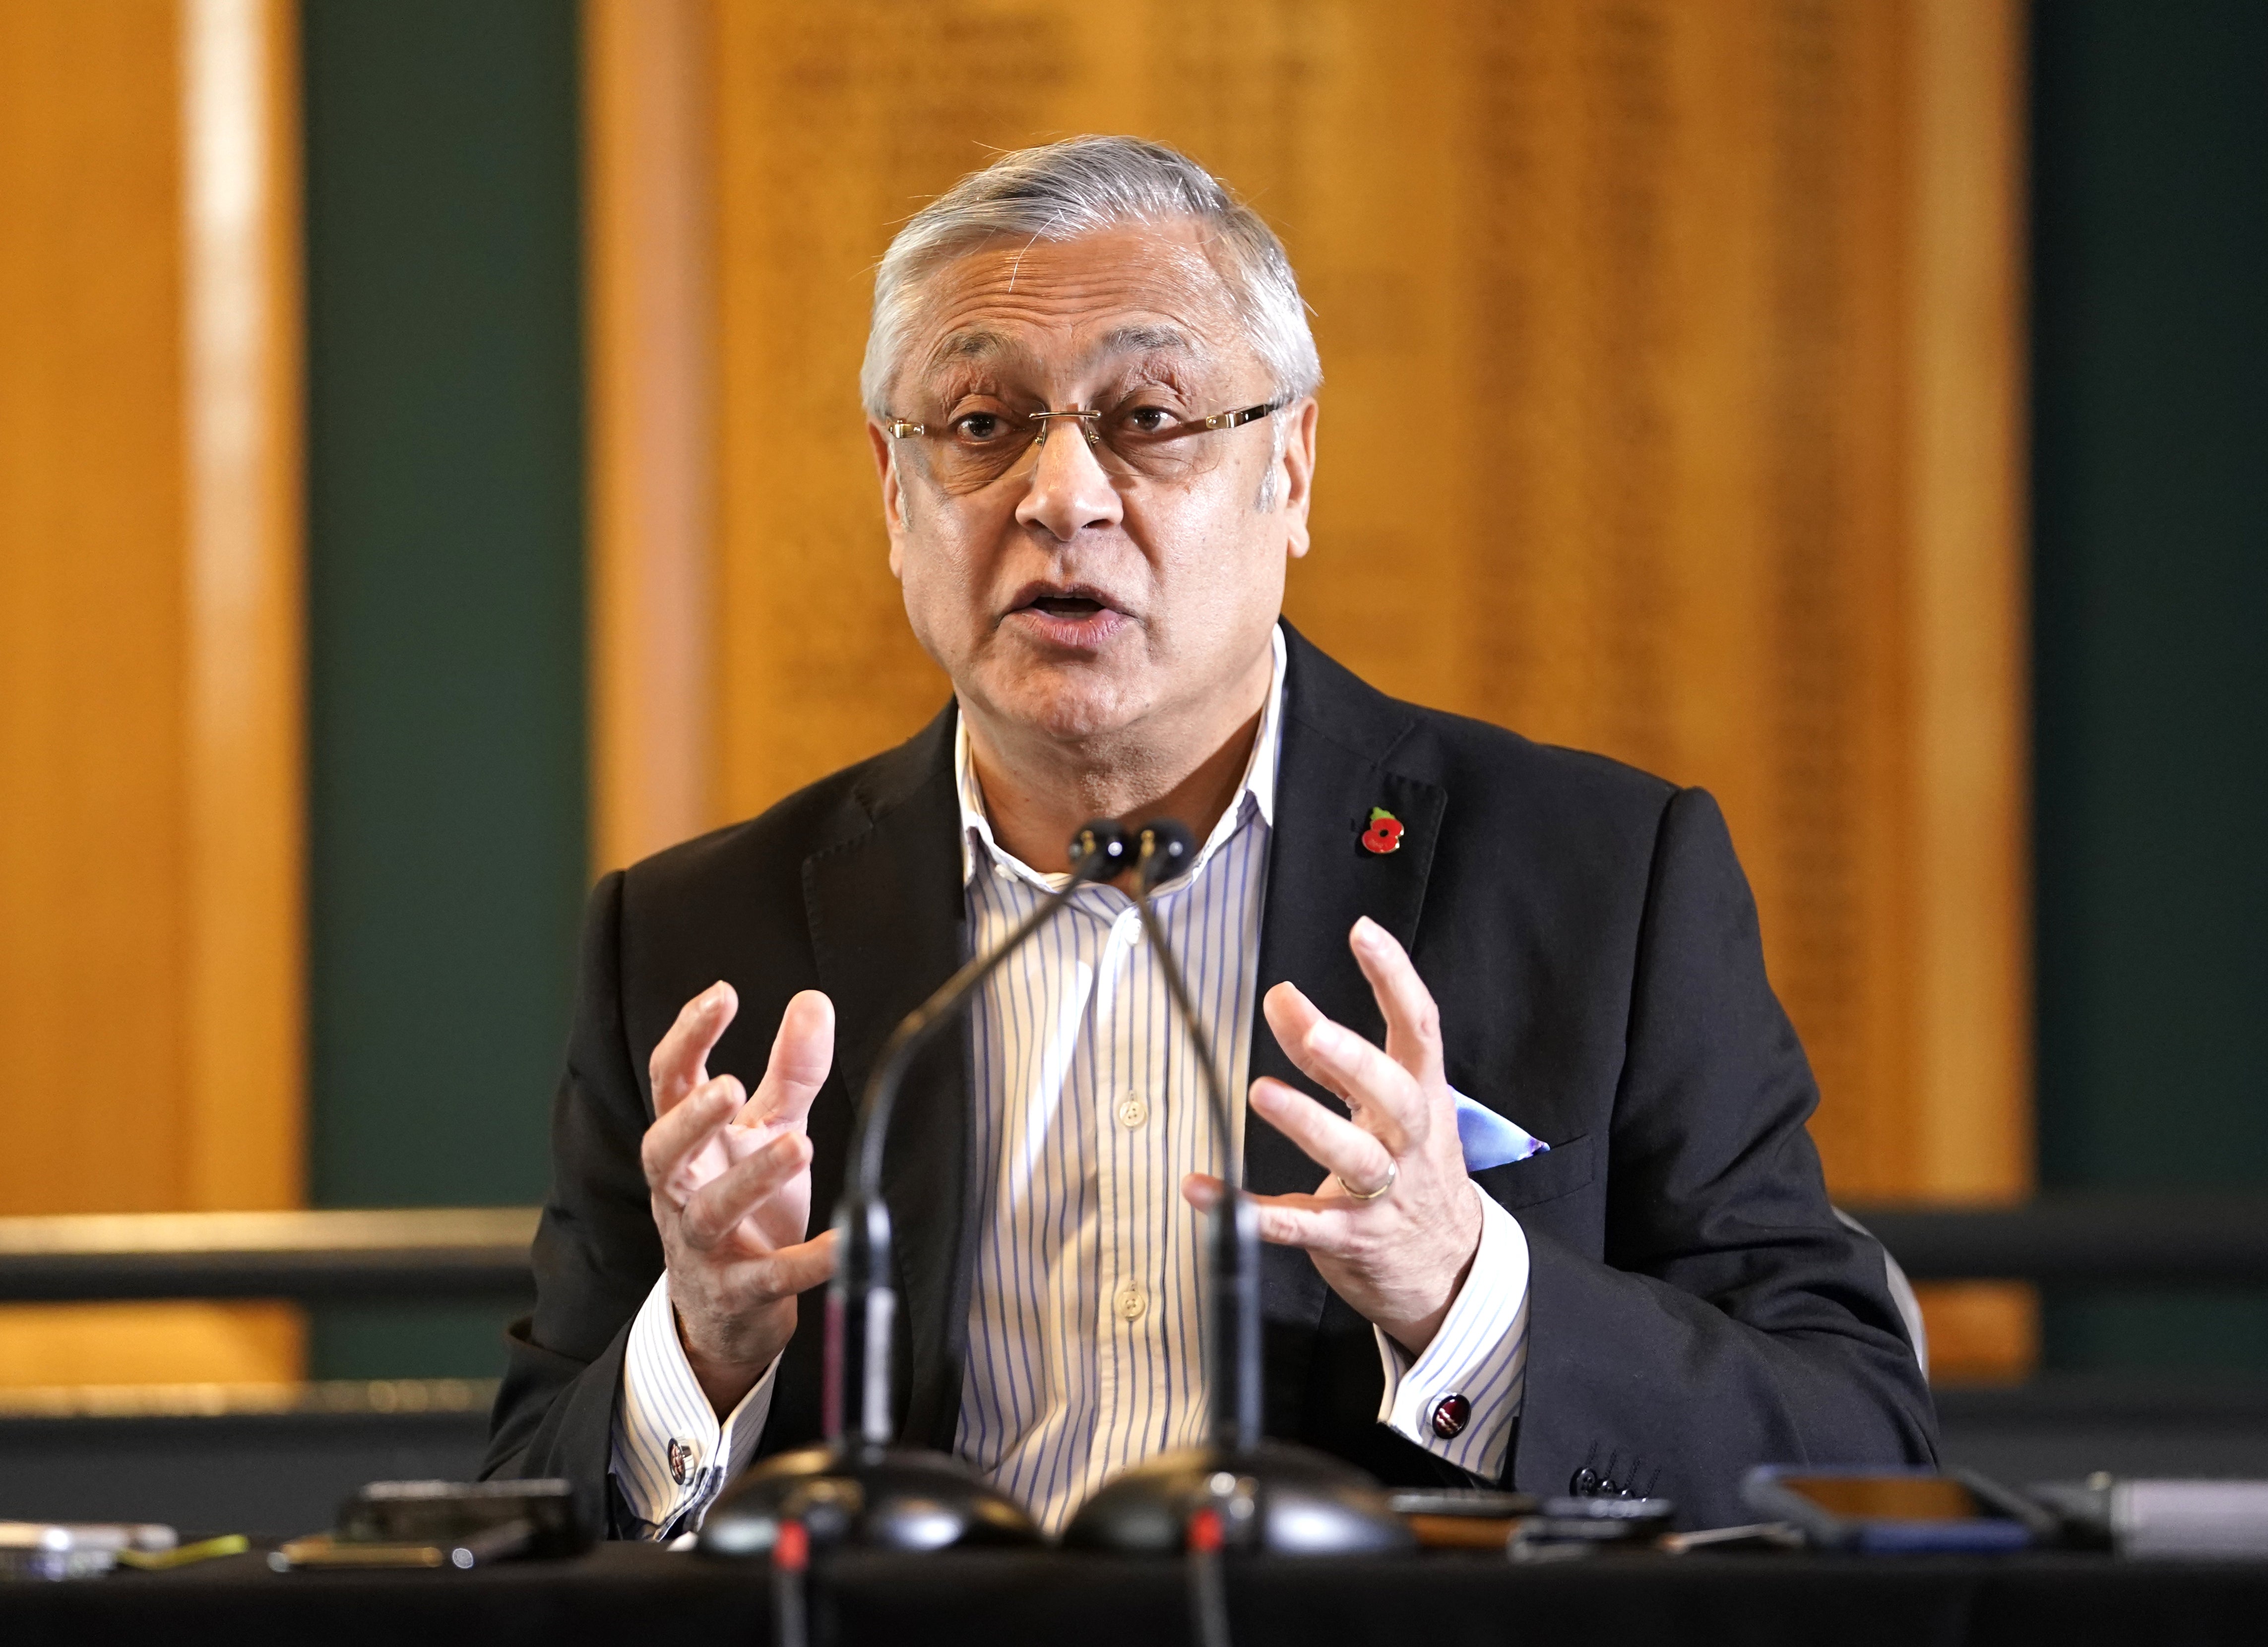 Lord Patel has overseen sweeping reforms at Yorkshire (Danny Lawson/PA)